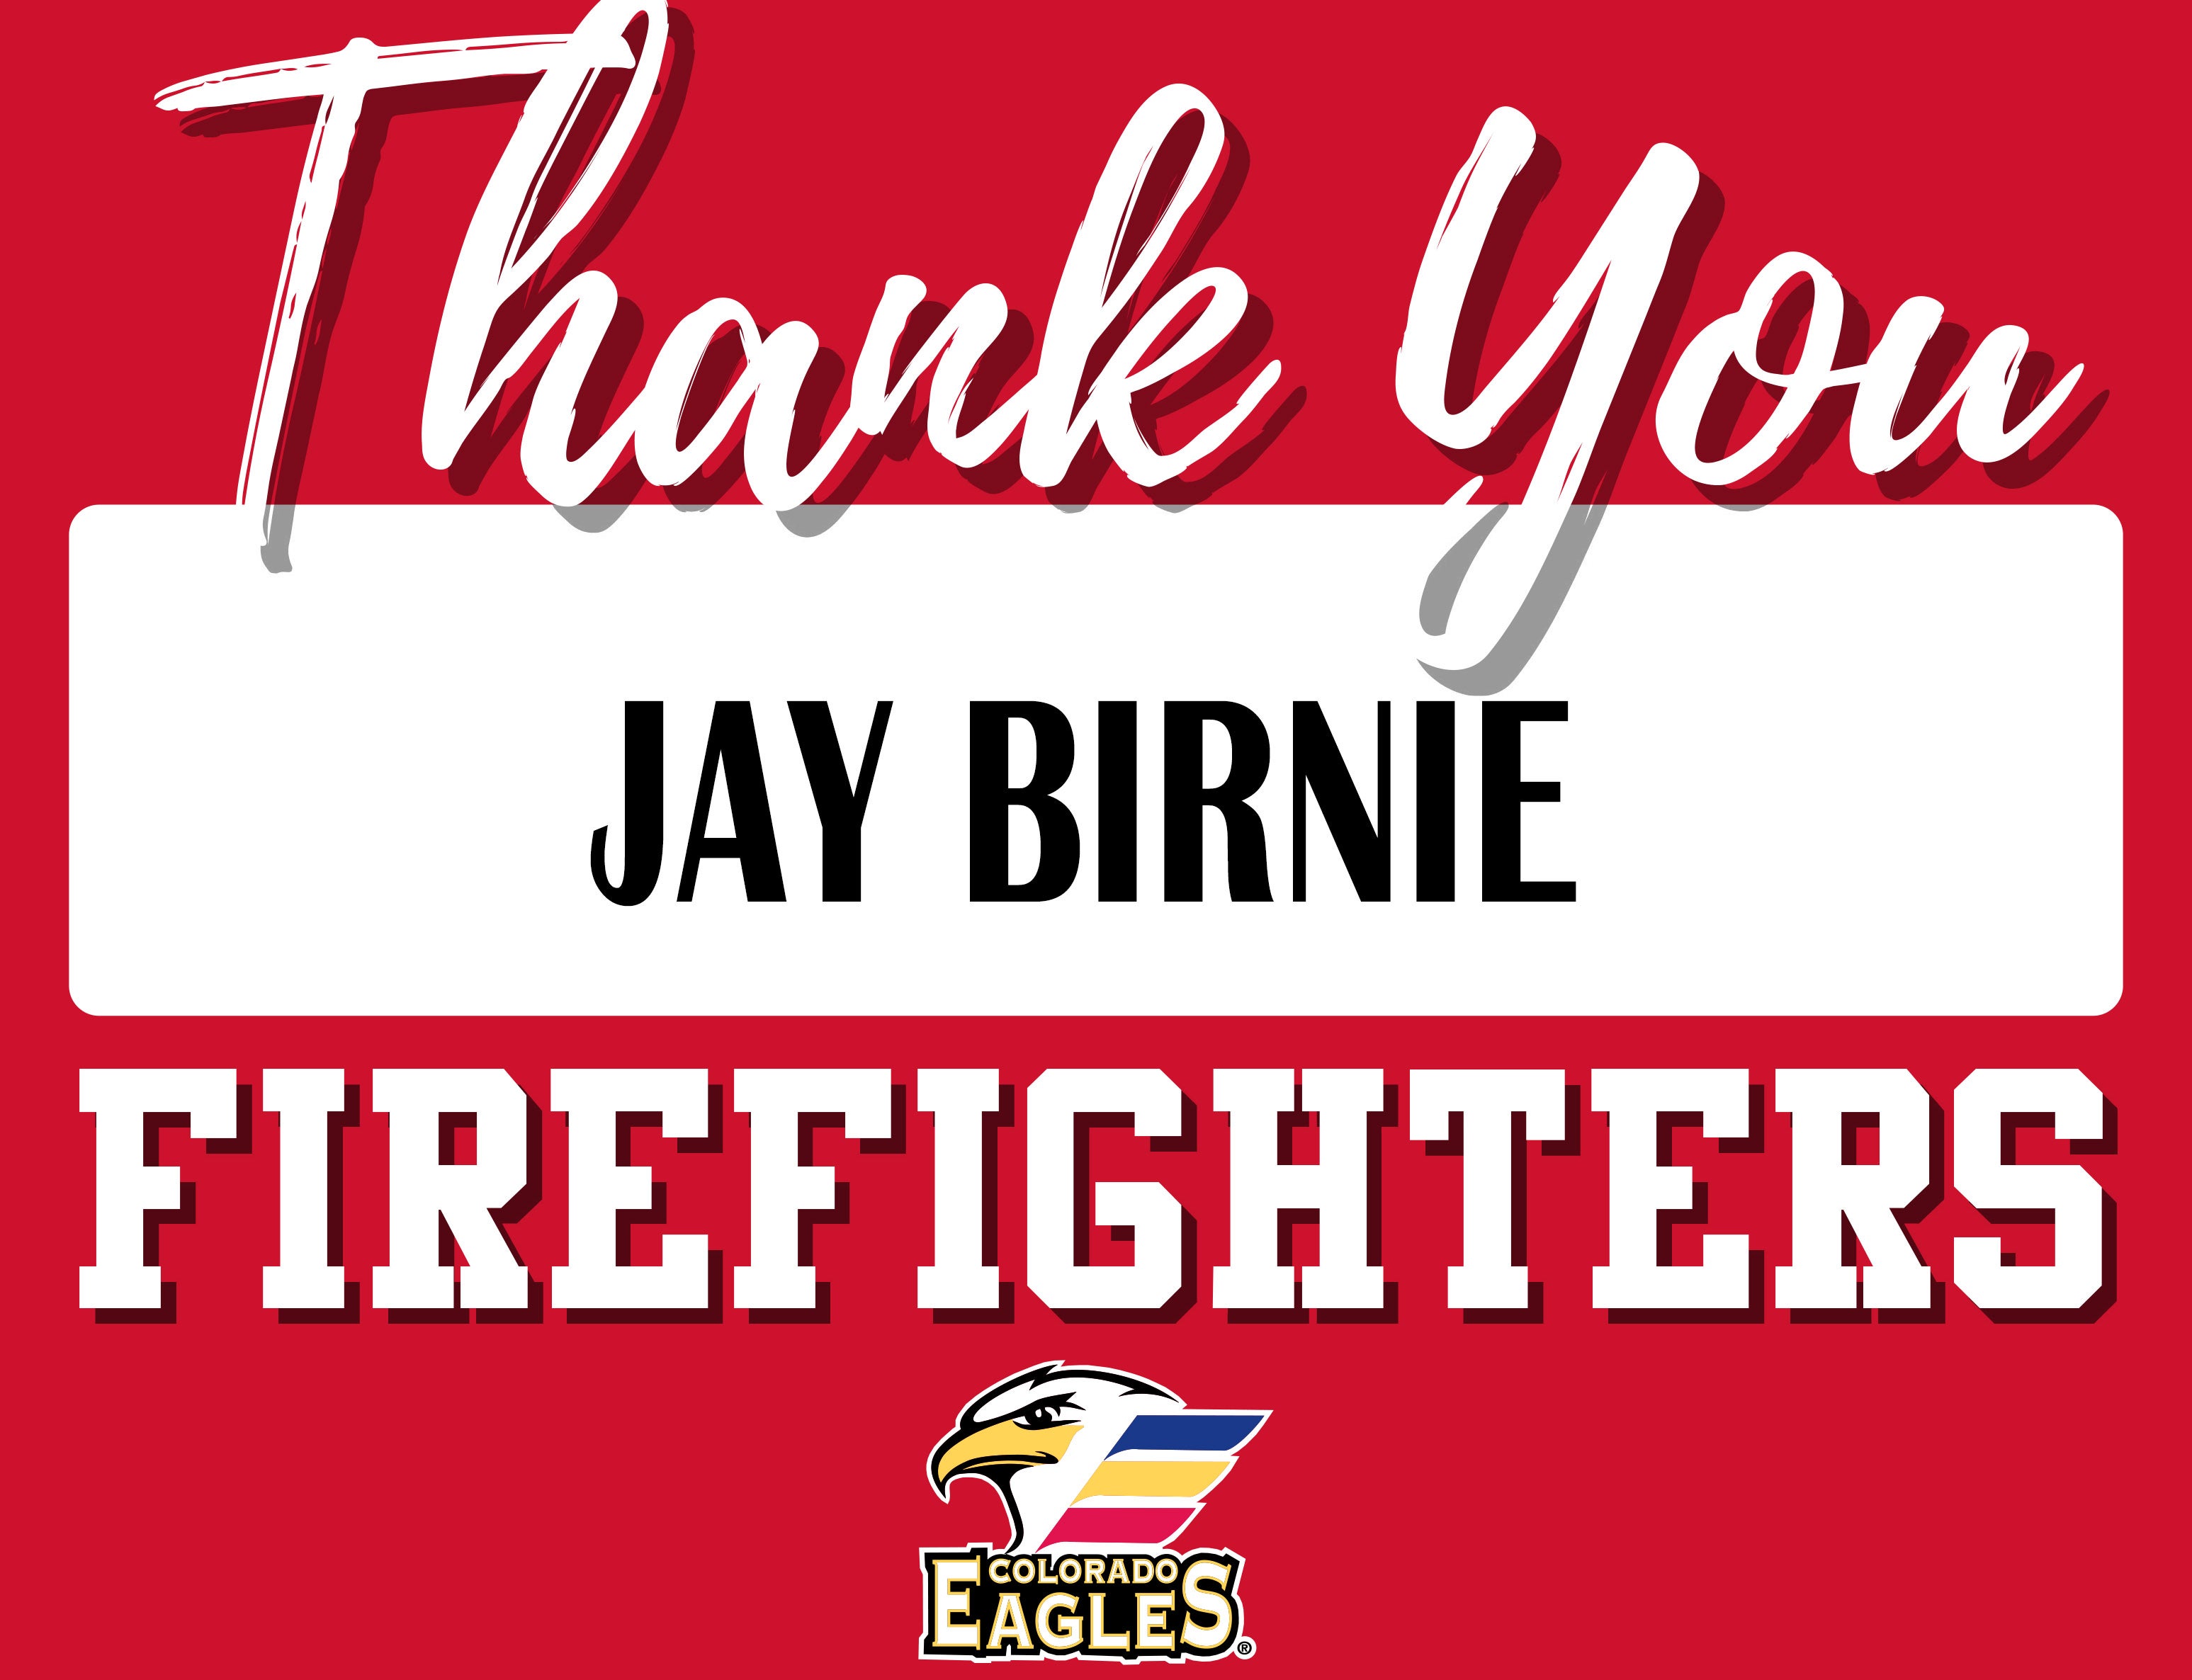 Thank You Firefighters Flyer-3.jpg